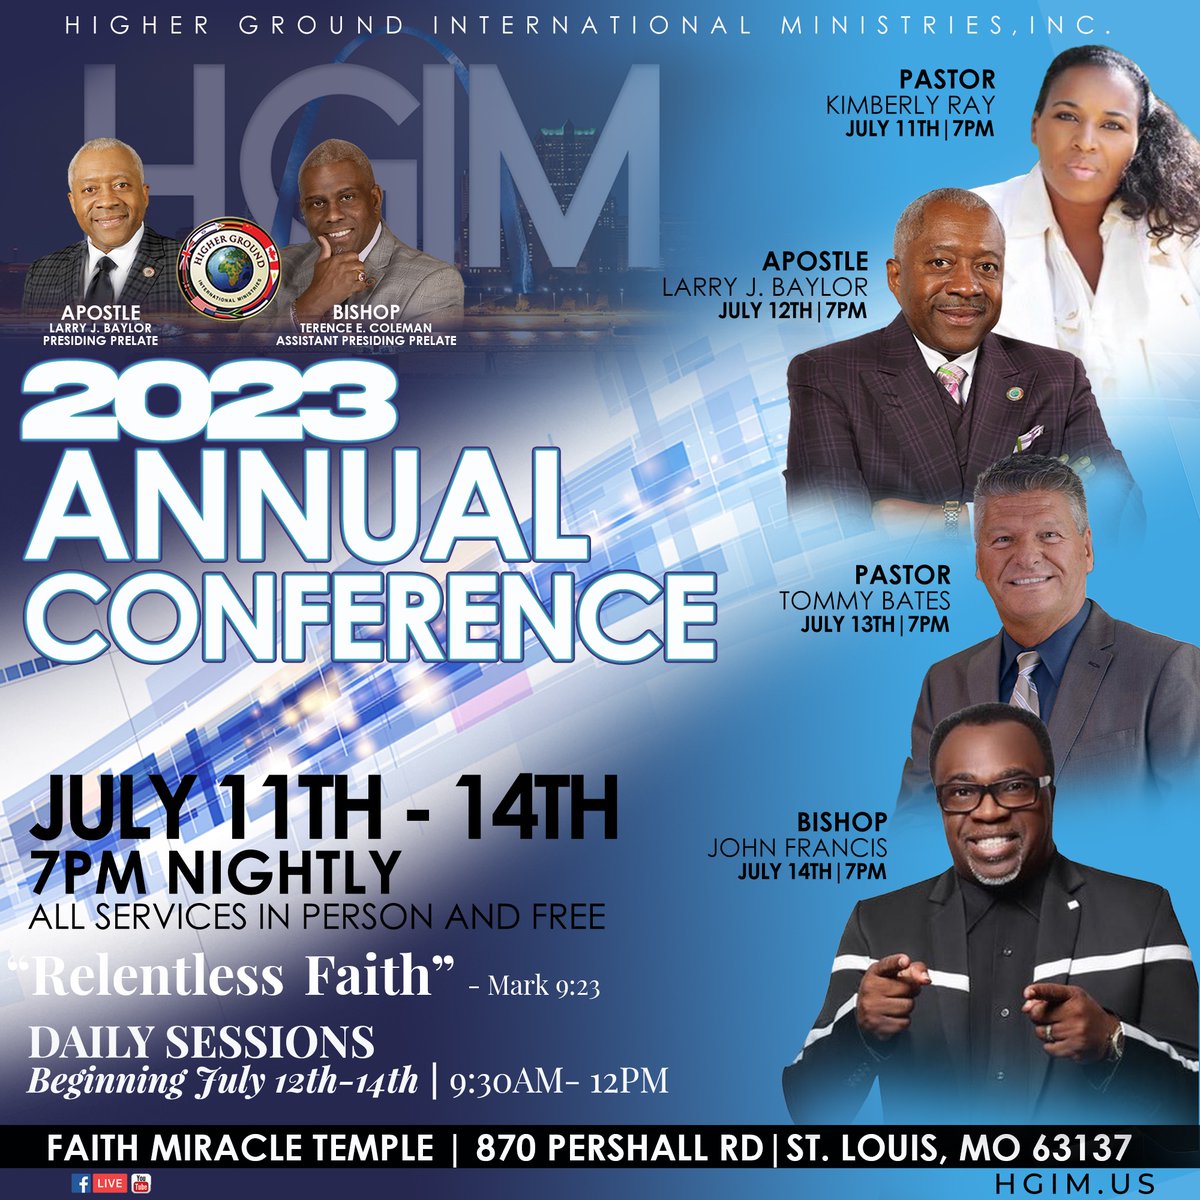 Our very own Bishop Larry Baylor will be our speaker during this year’s HGIM Annual Conference on Tuesday, July 12th at 7pm! #Conference #2023AnnualConference #inpersonSessions #annualconference #church #Jesus #Power #PowerofGod #God #Conference #ChurchConference